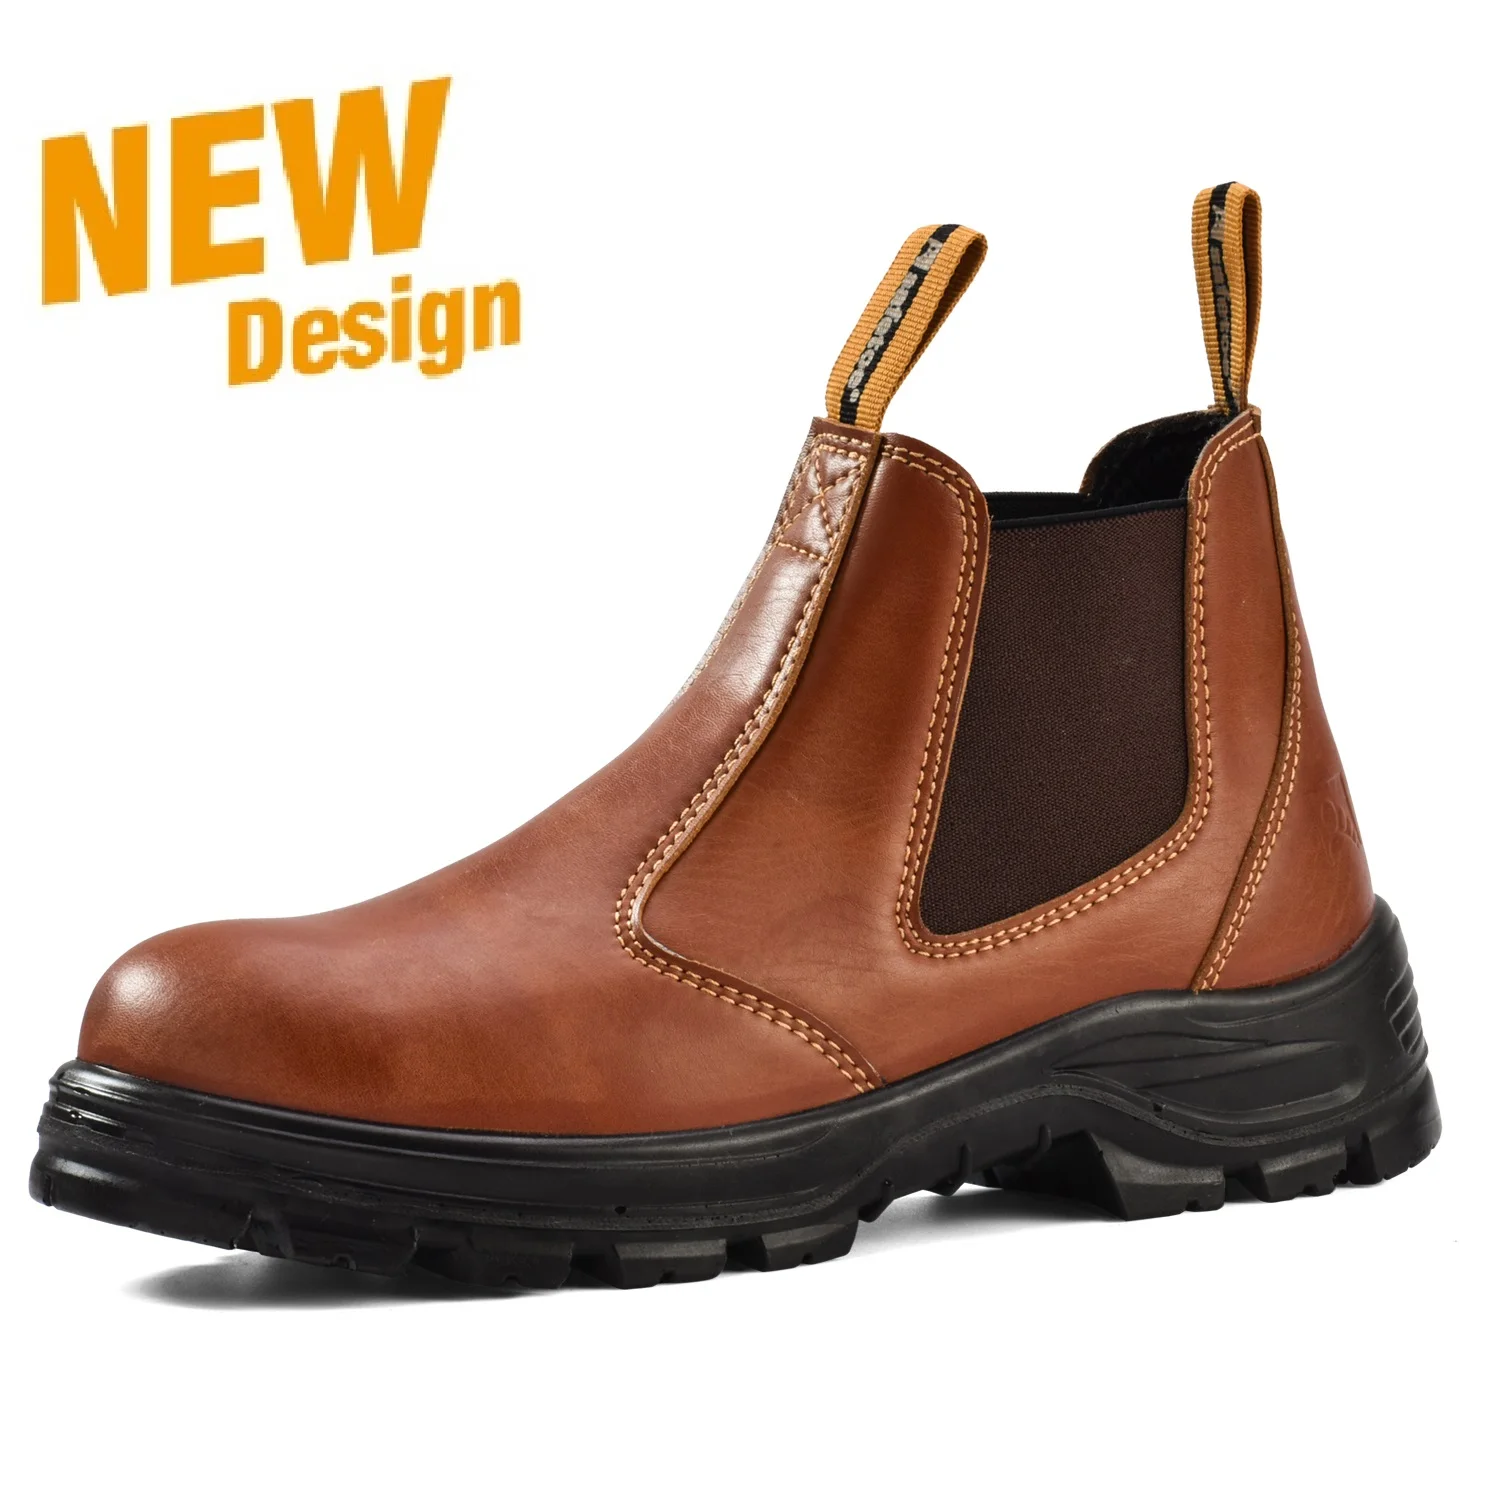 

New Design Water Resistant No Lace Safety Work Boots S3 Steel toe & Steel Midsole